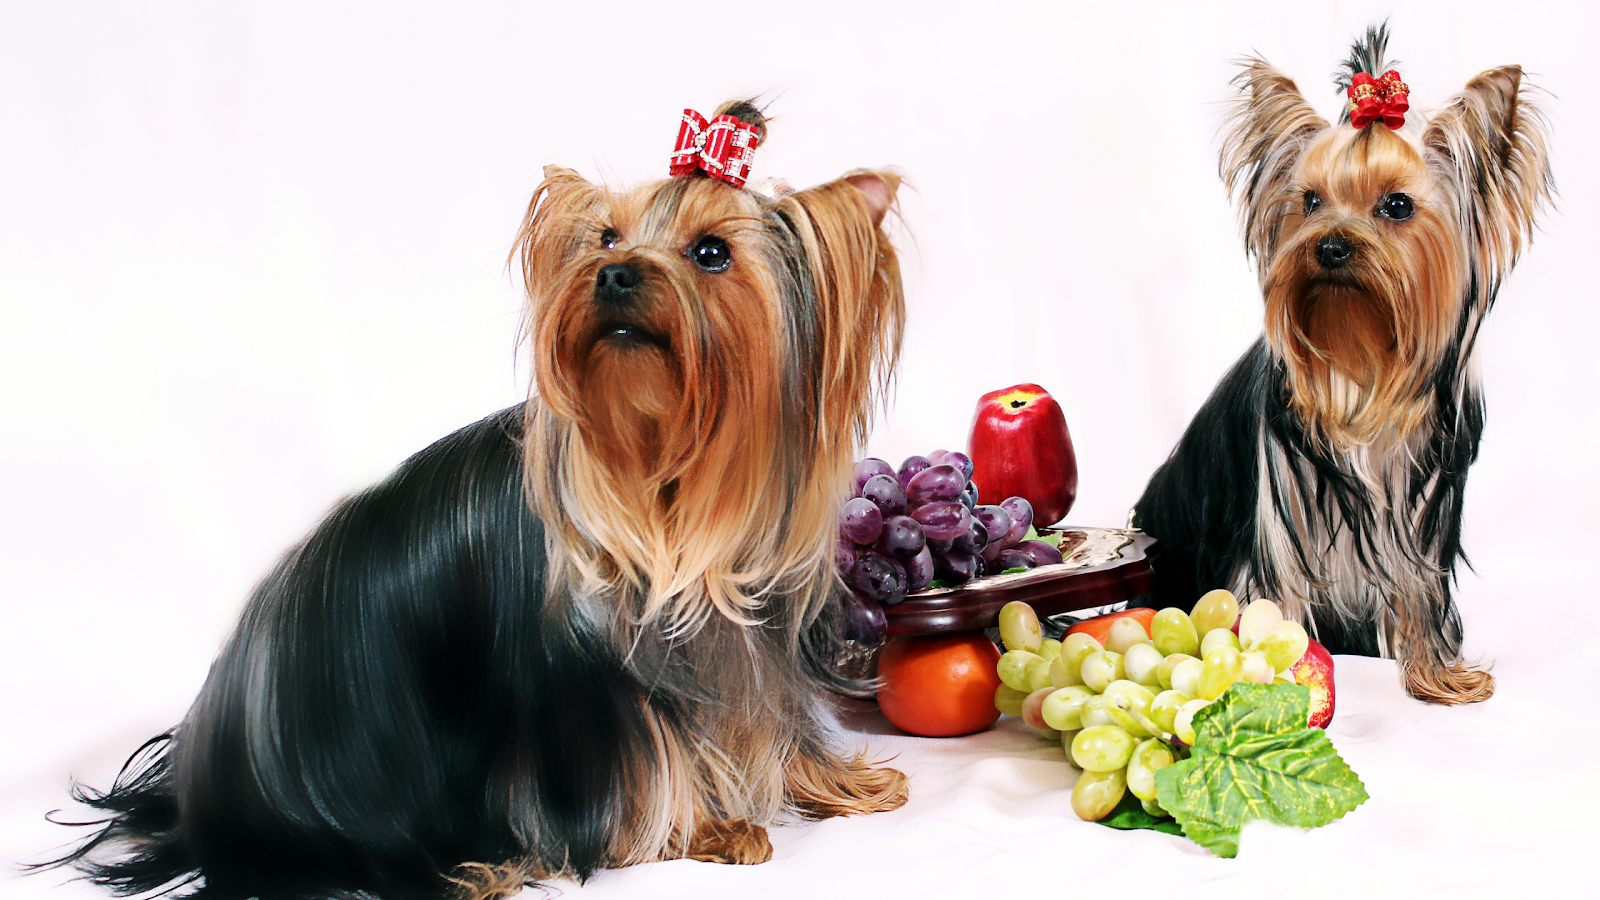 Fruits for dogs